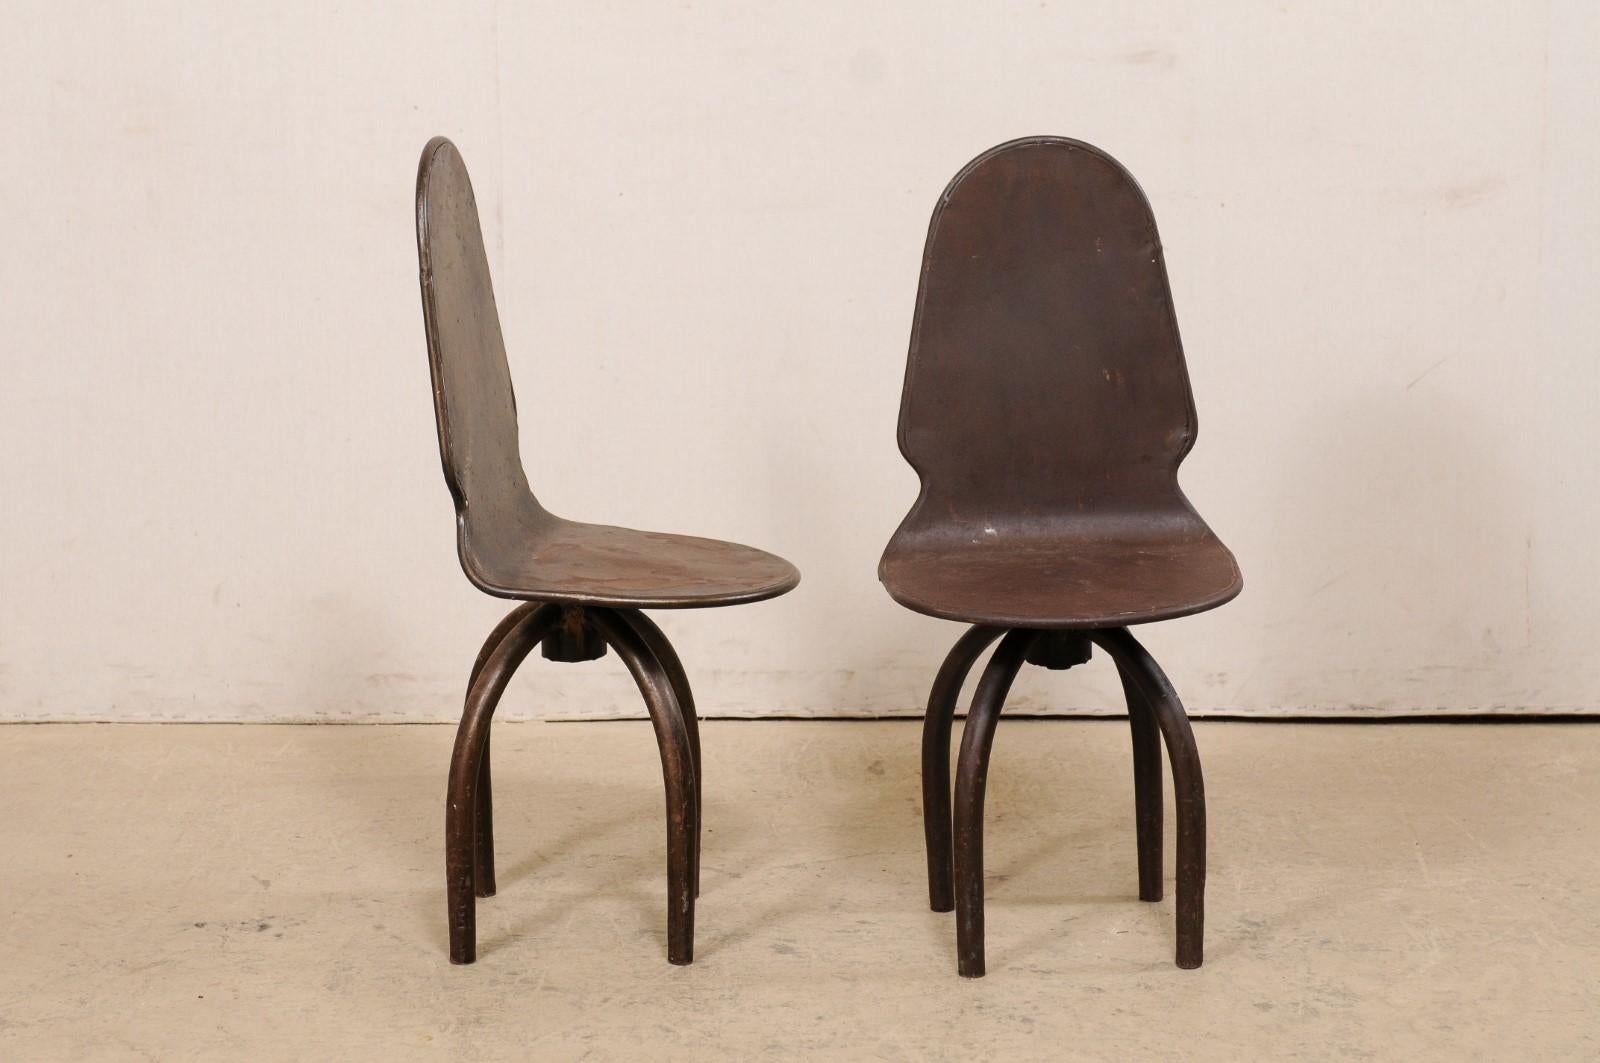 Spanish Pair of Iron Swivel Chairs on Spider-Style Legs, Industrial-Chic For Sale 4